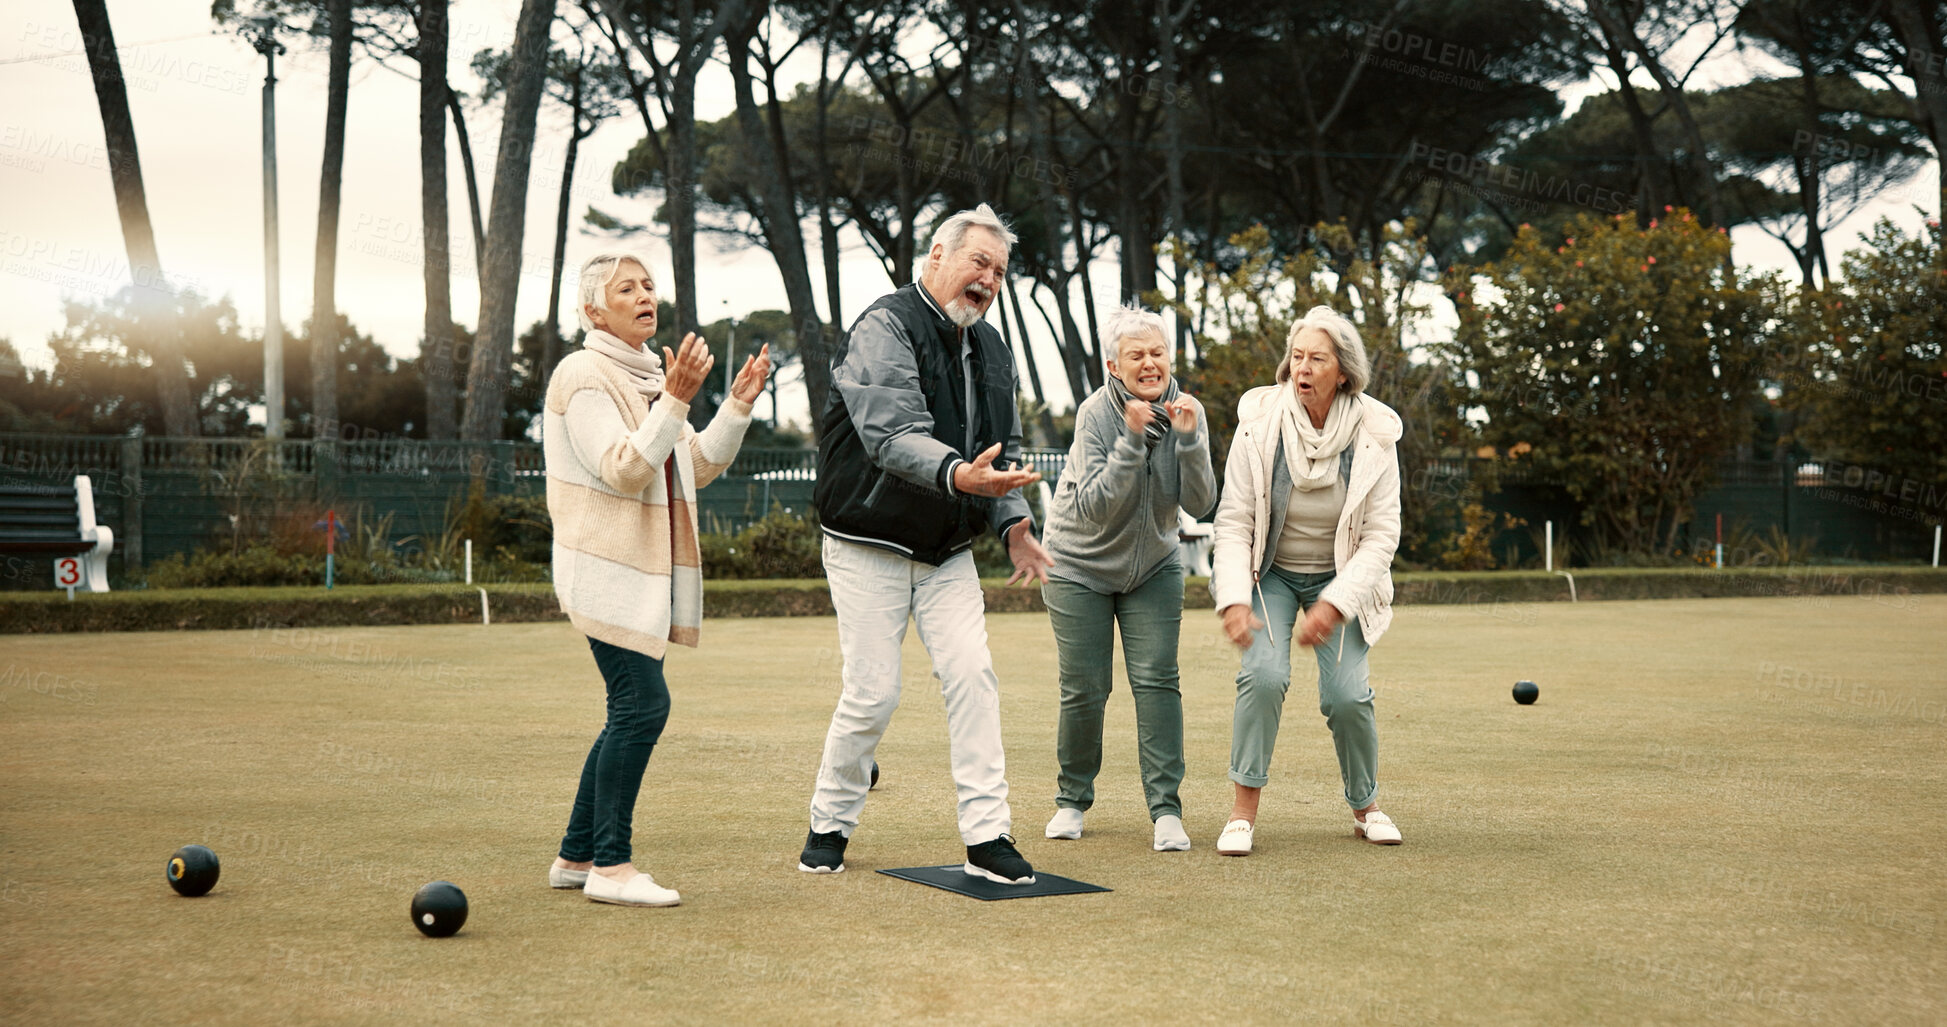 Buy stock photo Senior man, team and bowling on grass with miss, fail or support for fitness, sport or game in retirement. Teamwork, group and elderly women with metal ball, exercise or kindness for training on lawn